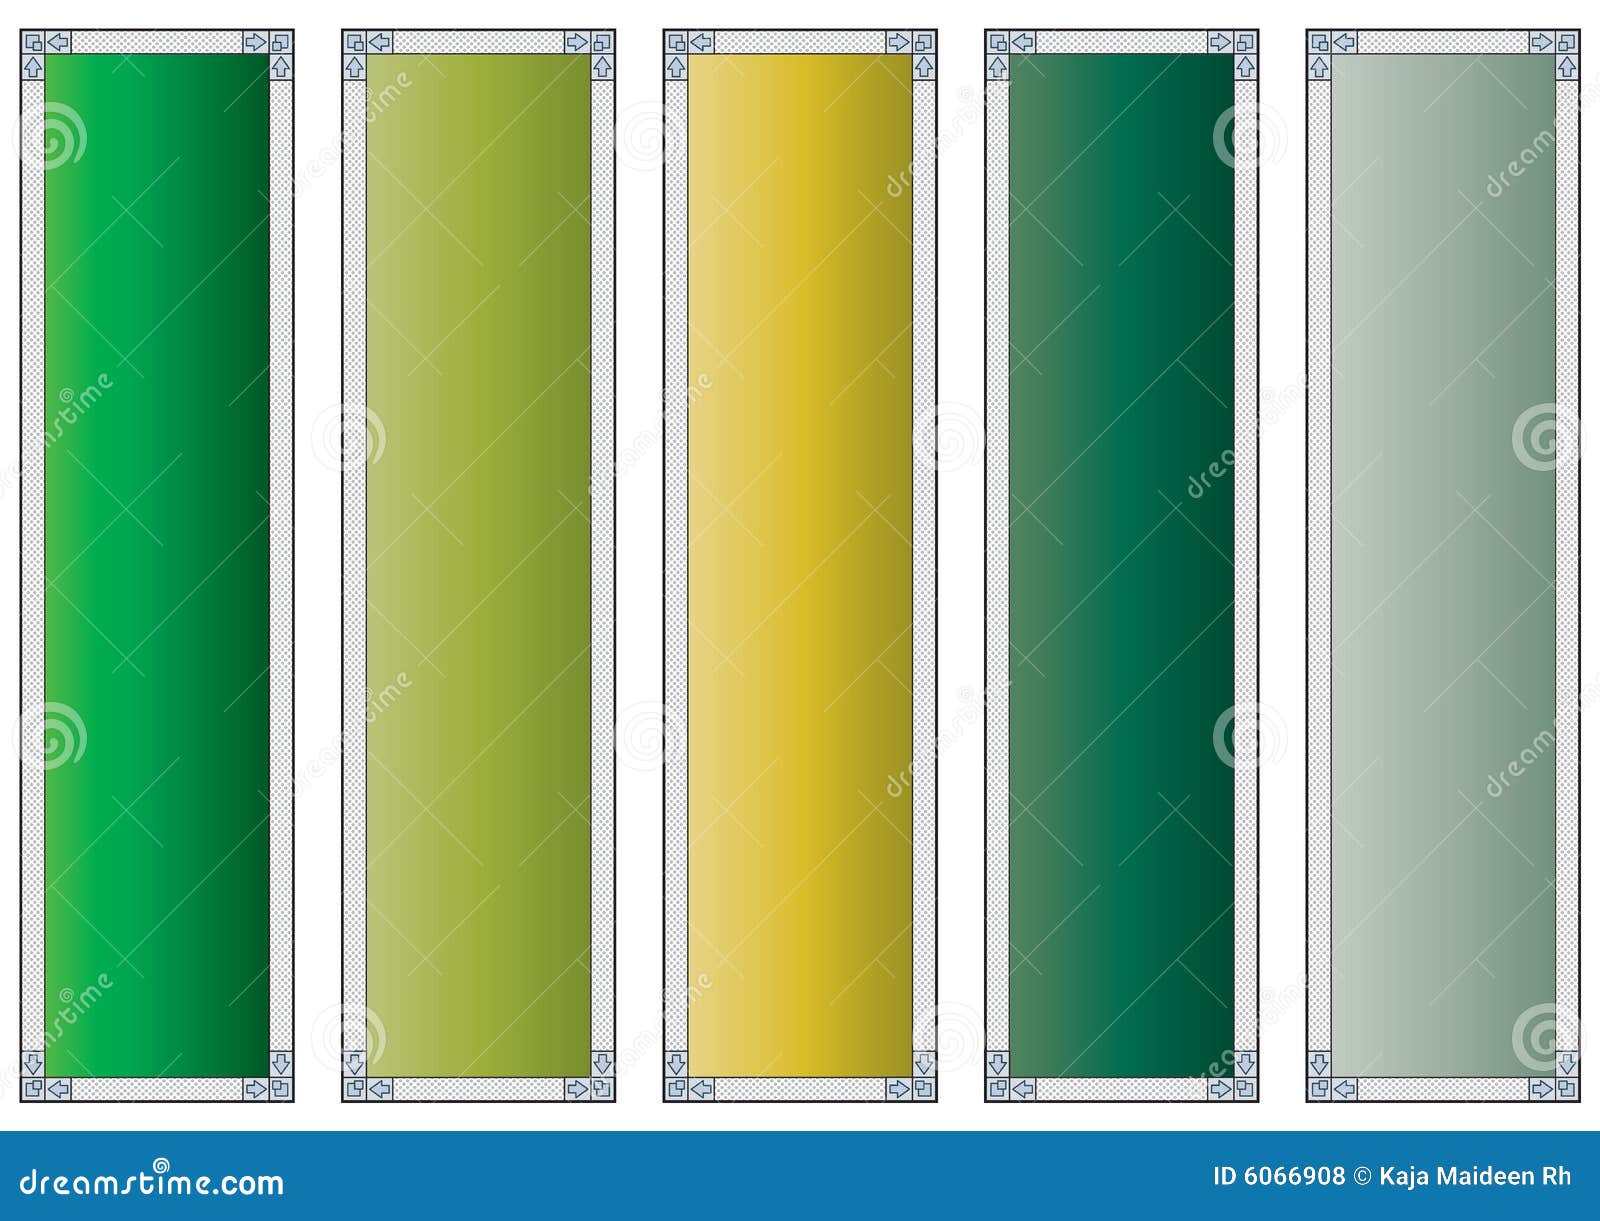 windowed colorful banners